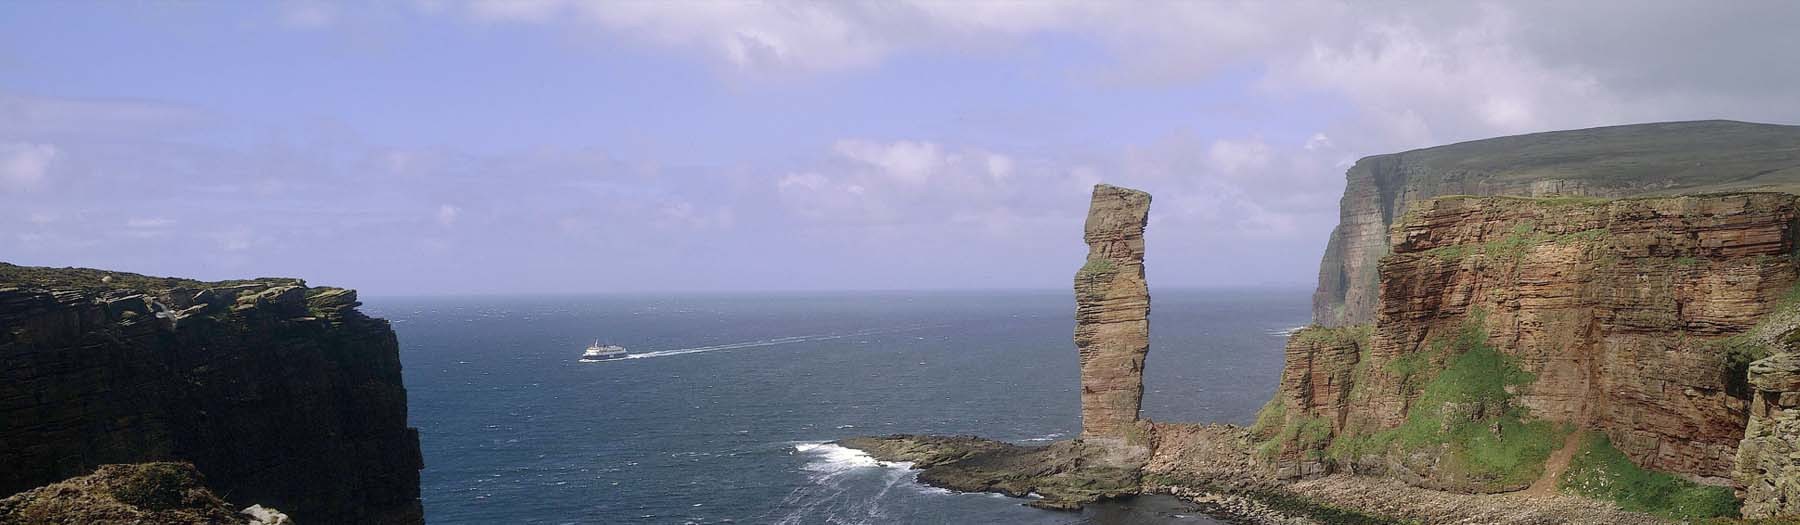 Image: Old Man of Hoy. Credit: Image used with permission from VisitScotland and Scottish Viewpoint.